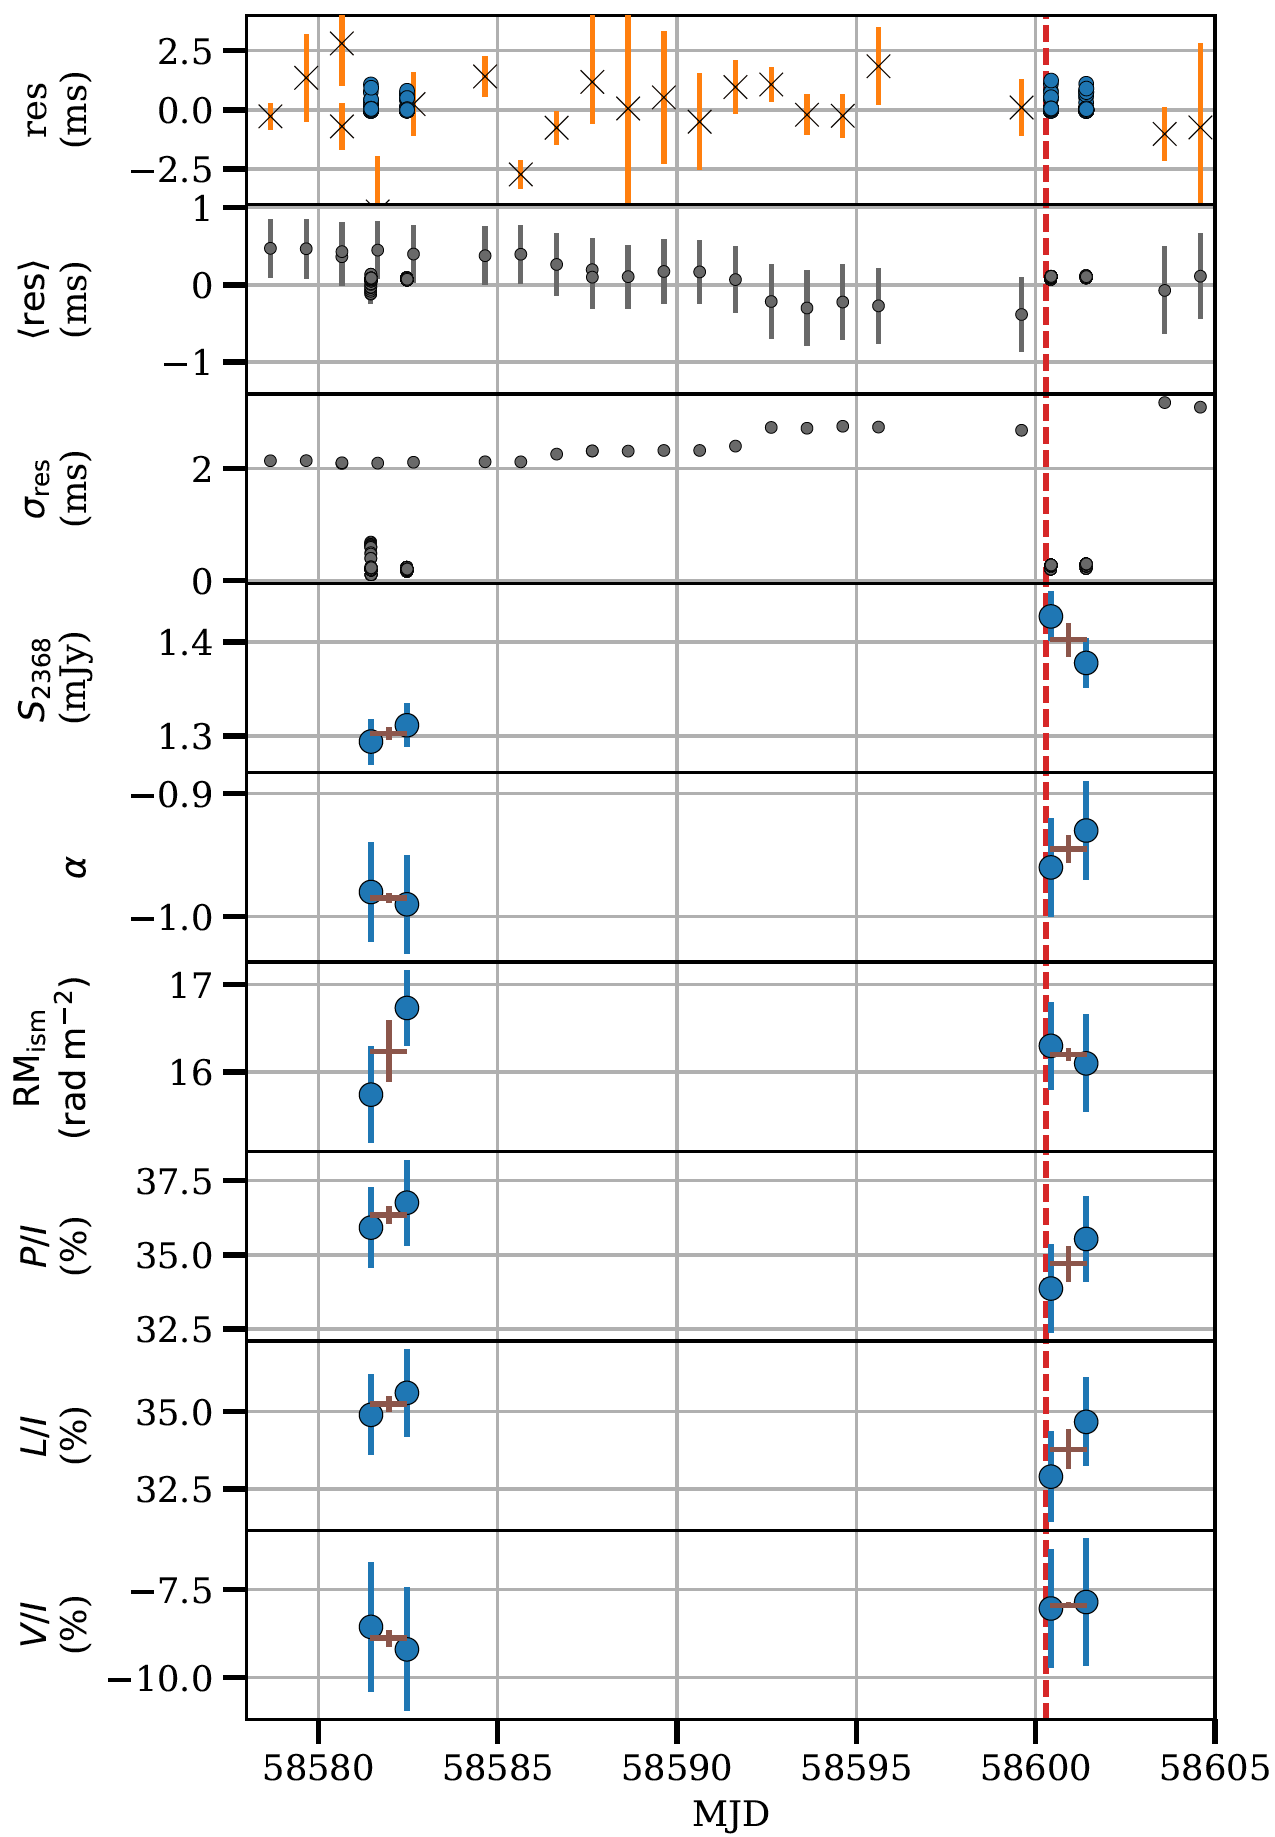 Timeline of various pulsar parameters across the glitch epoch.